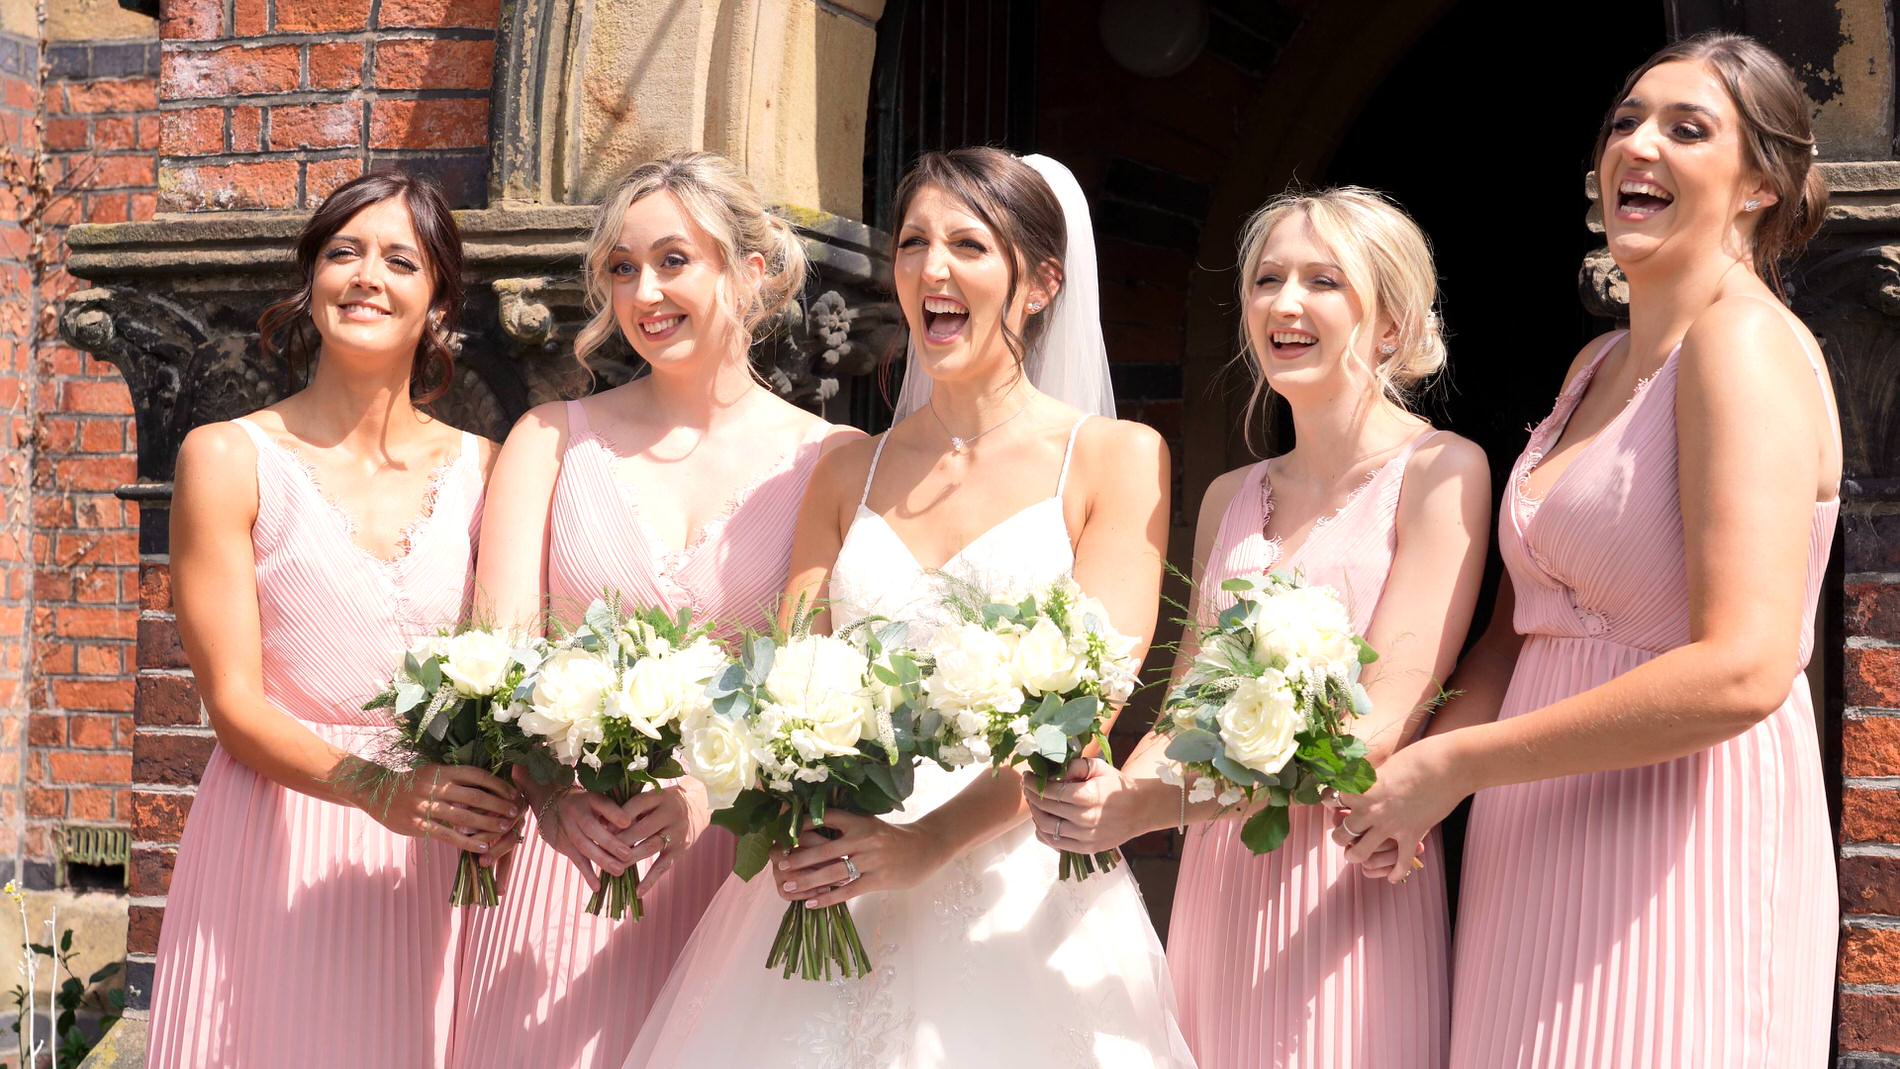 the bride stands with her bridesmaids dressed in blush pink